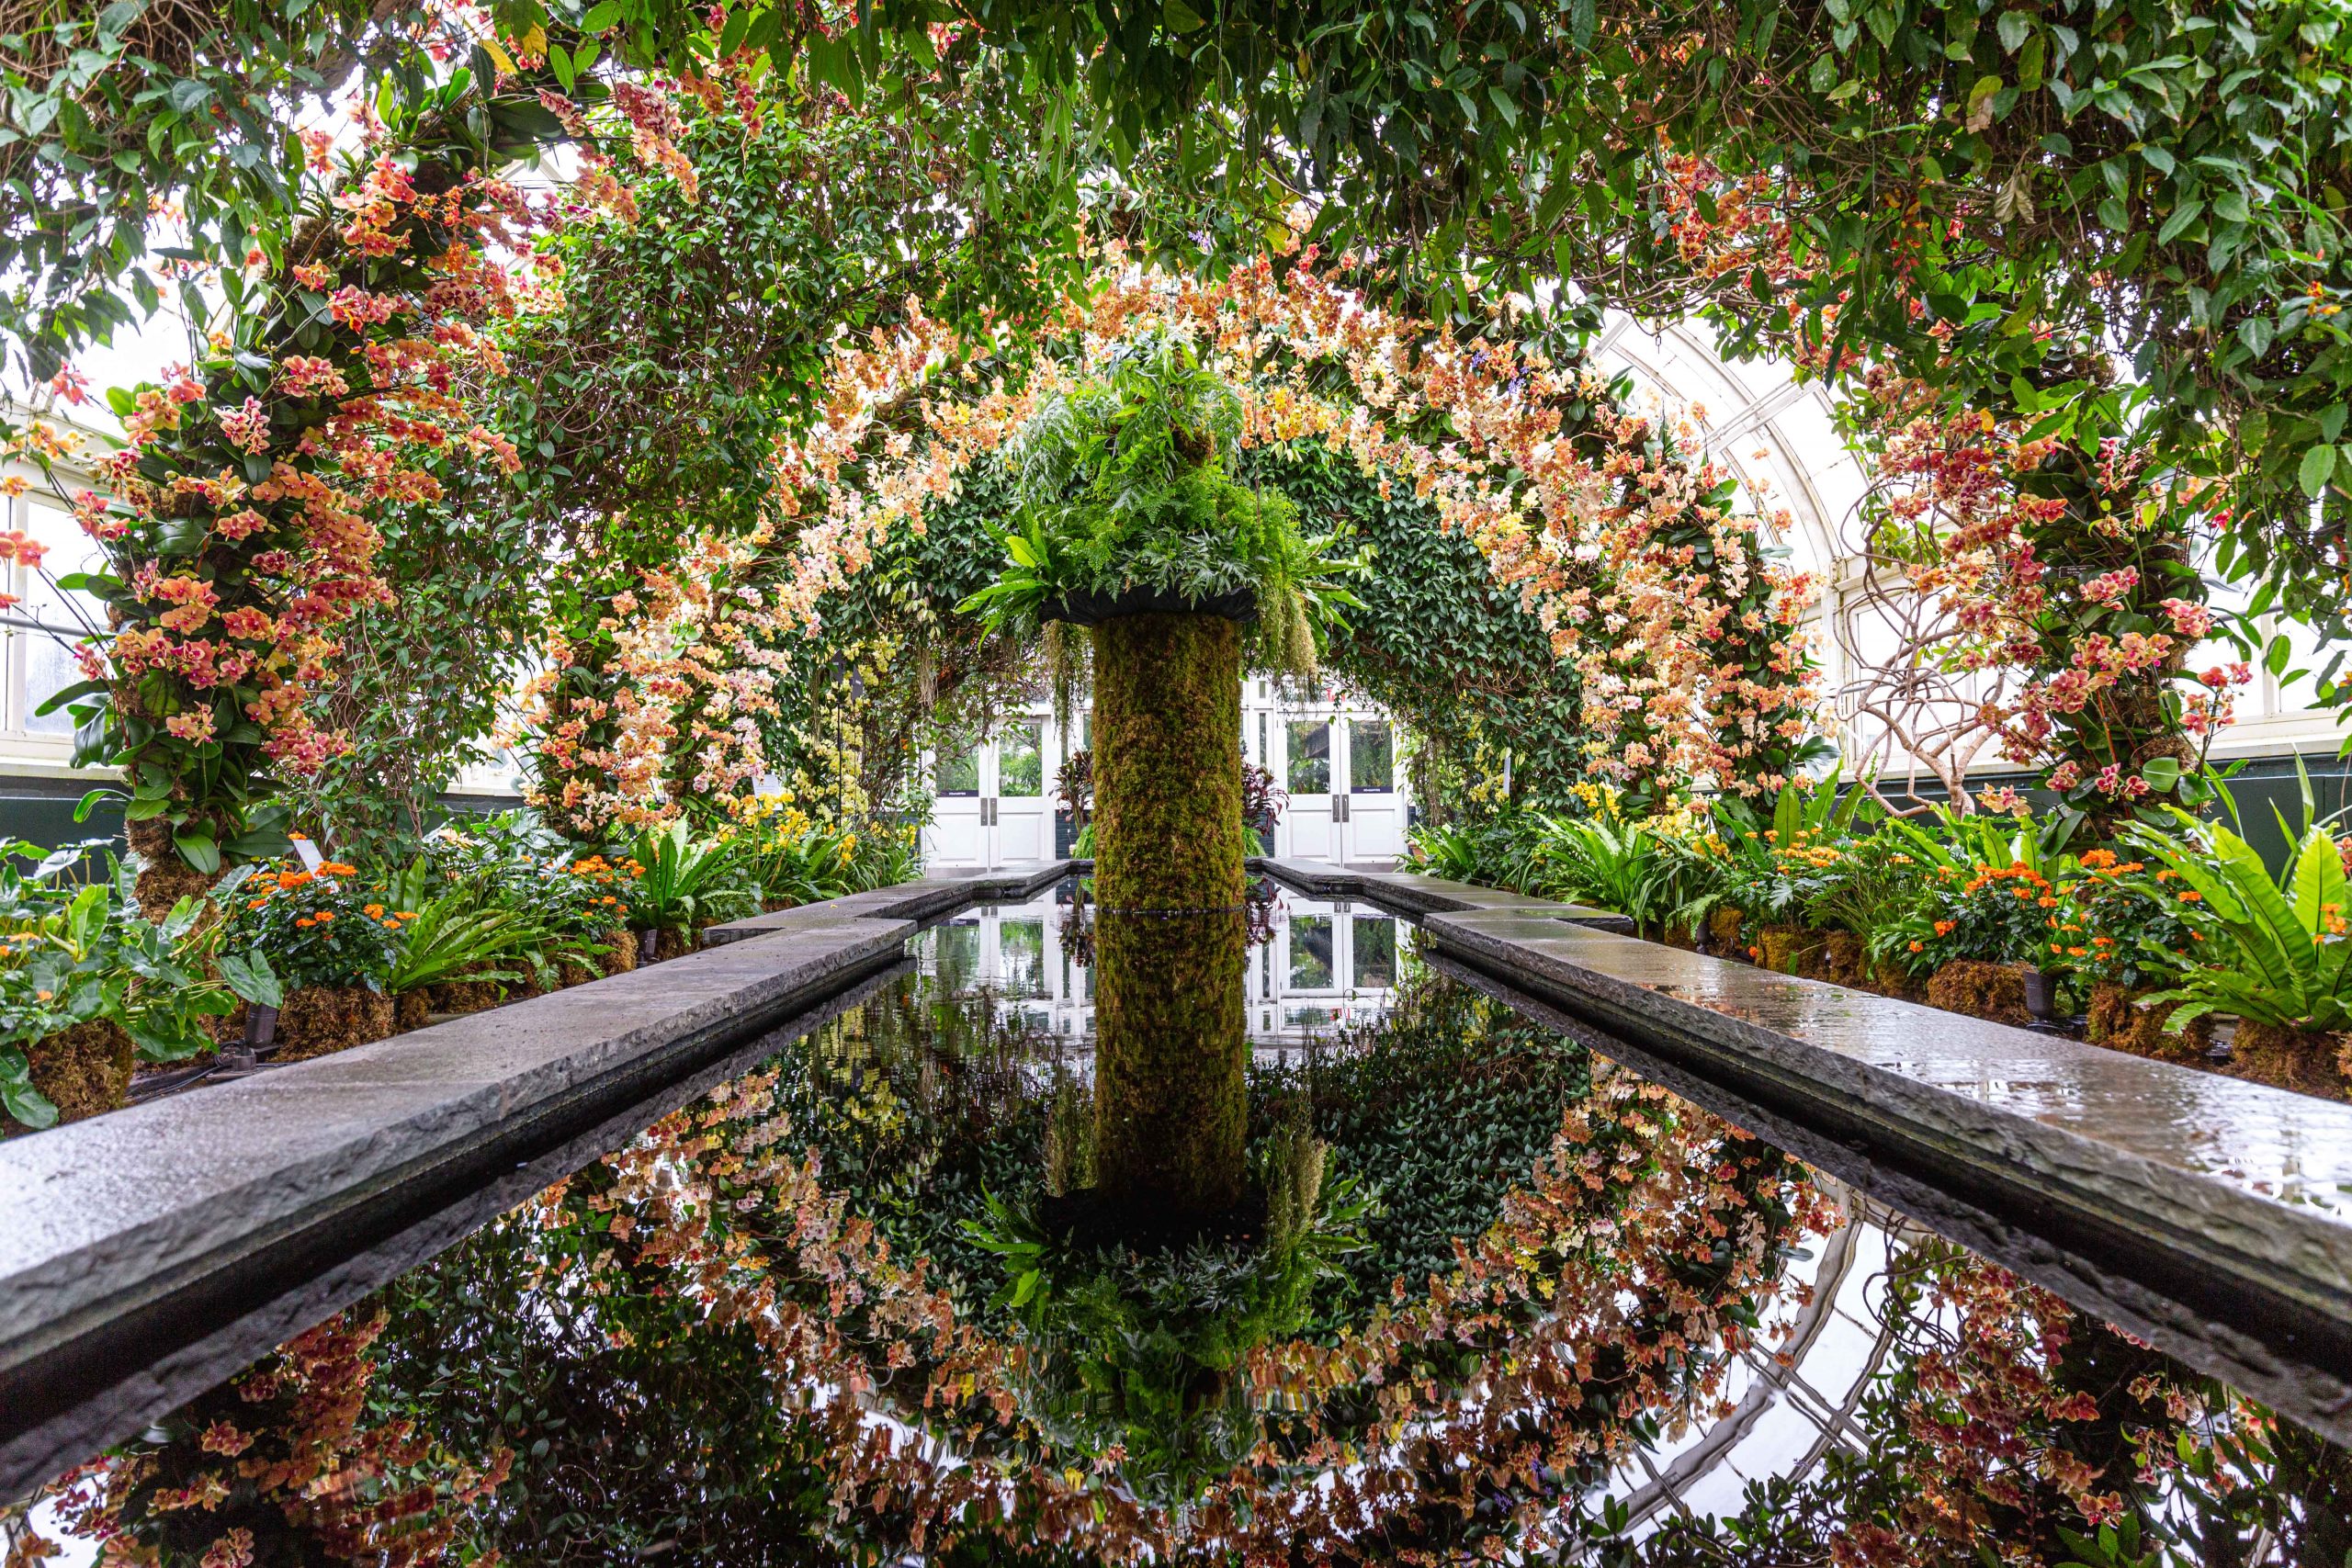 How Much Are Tickets To The New York Botanical Garden?